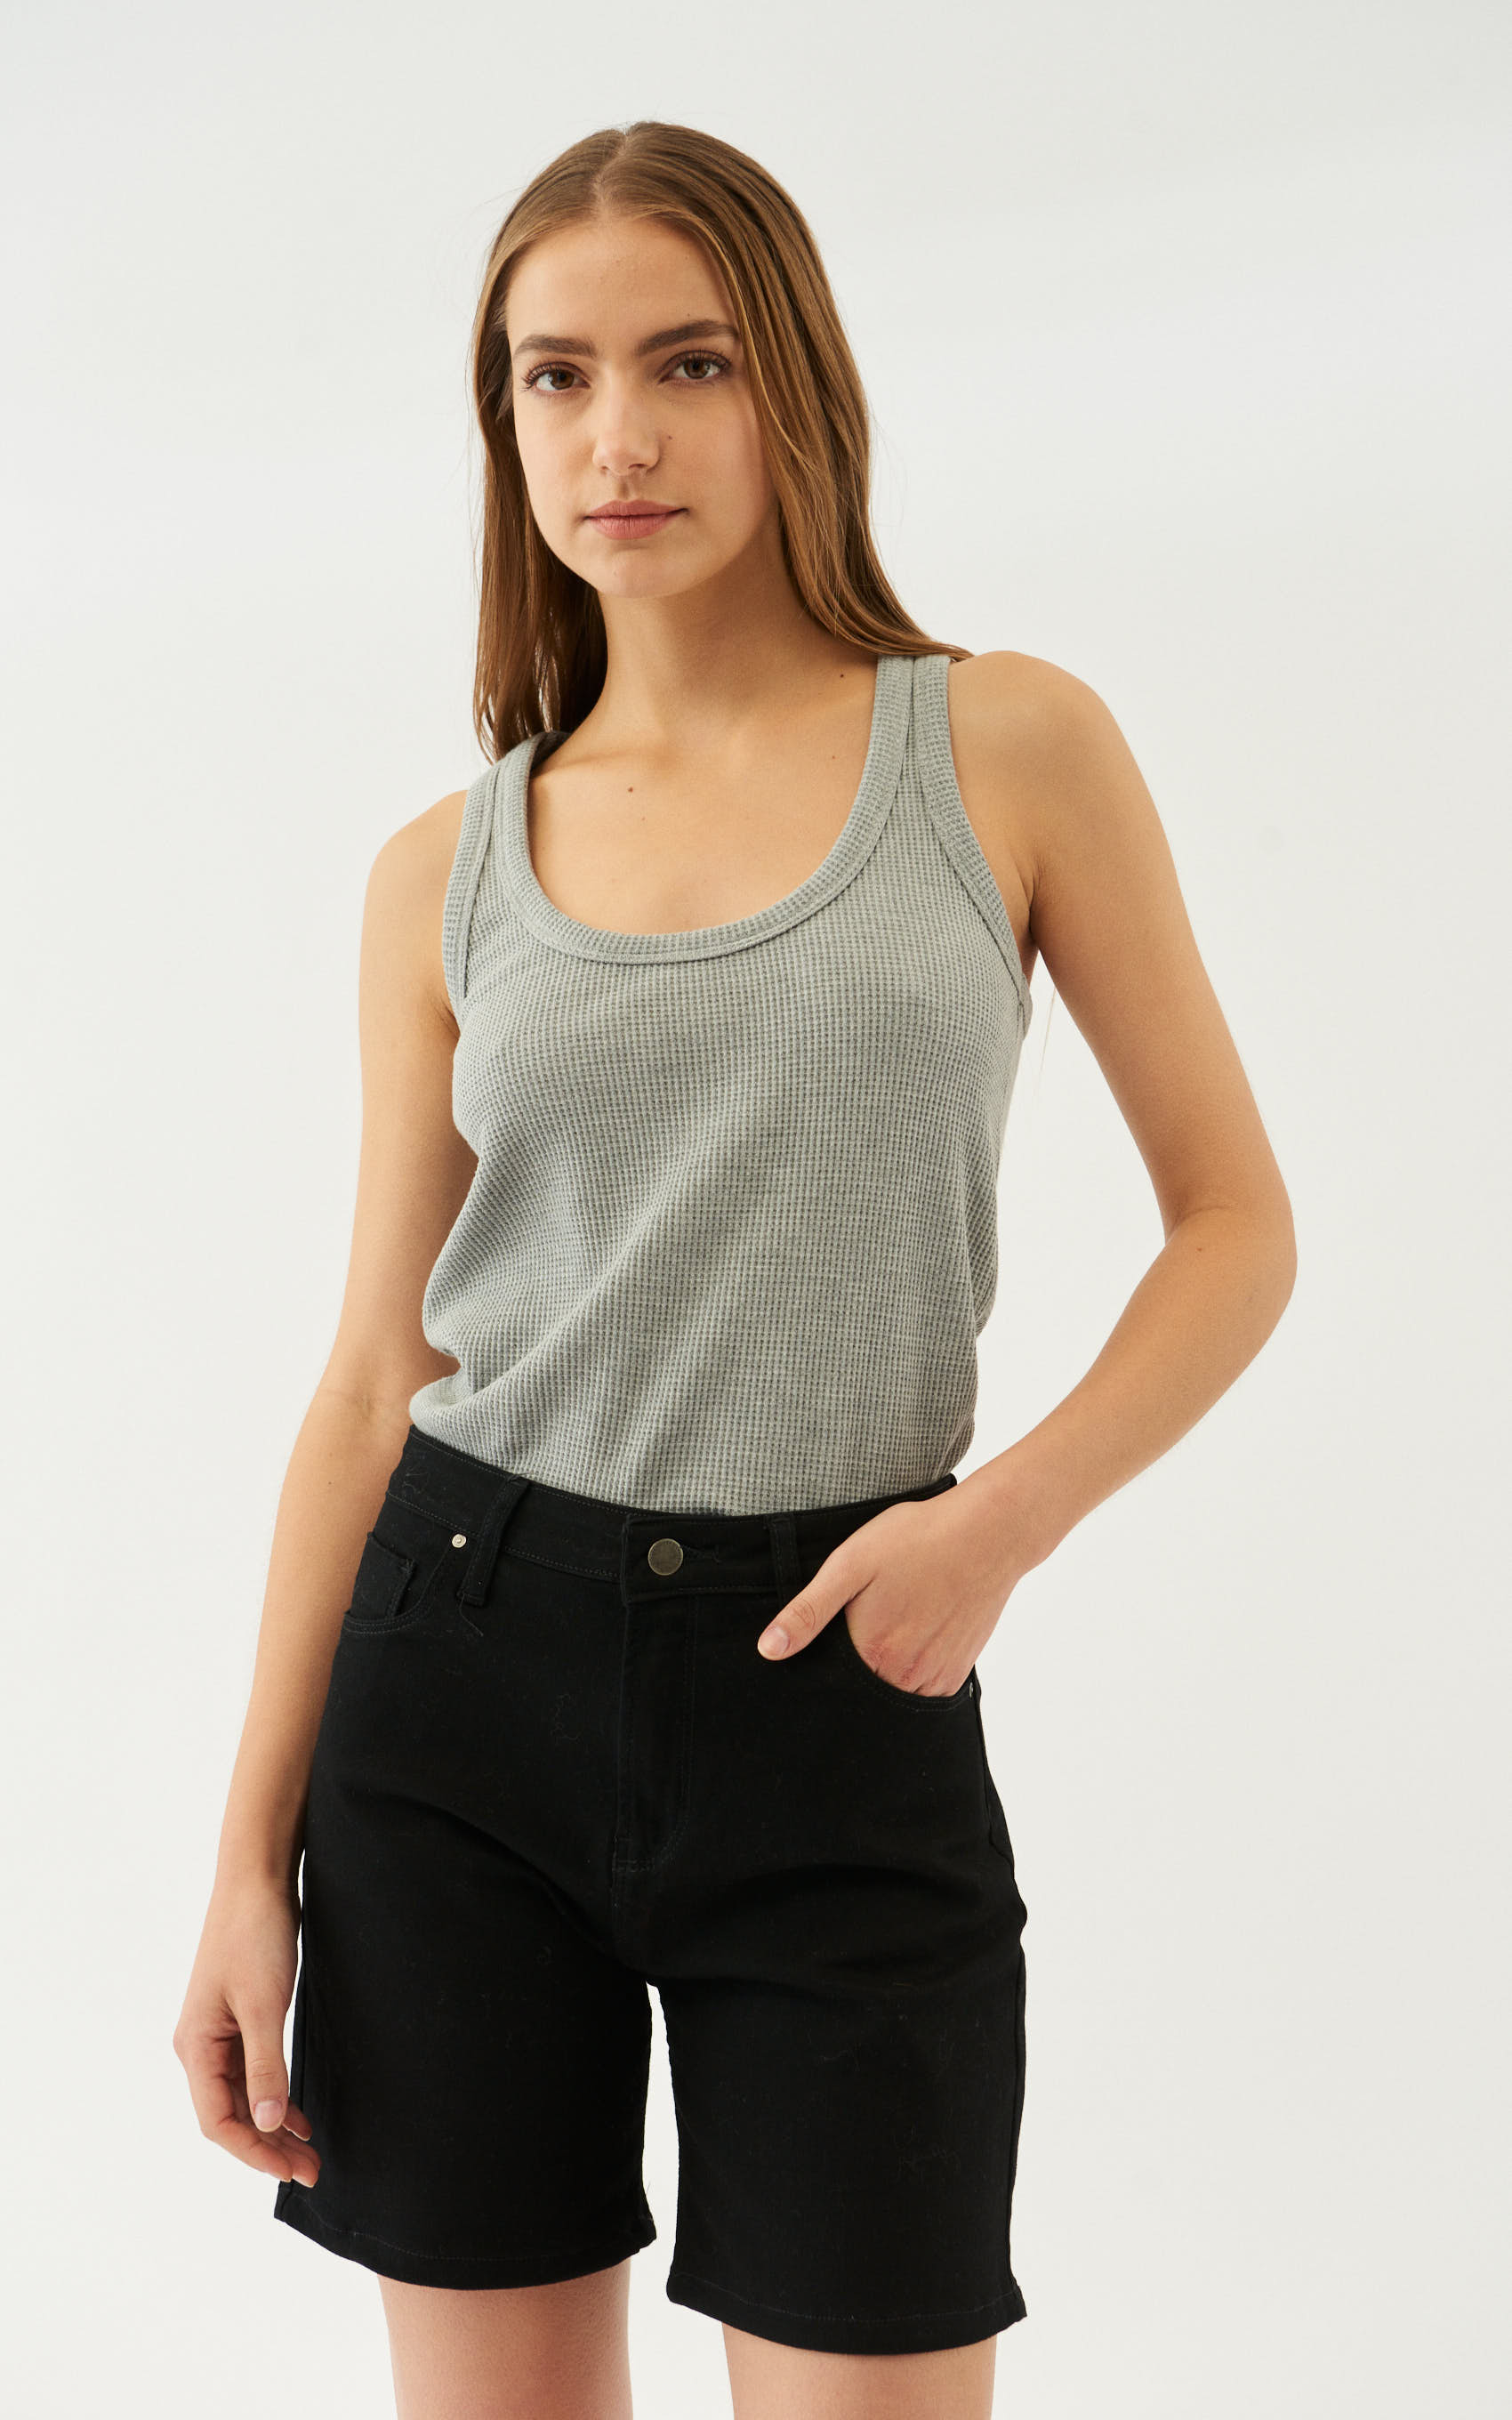 Musculosa Amelie